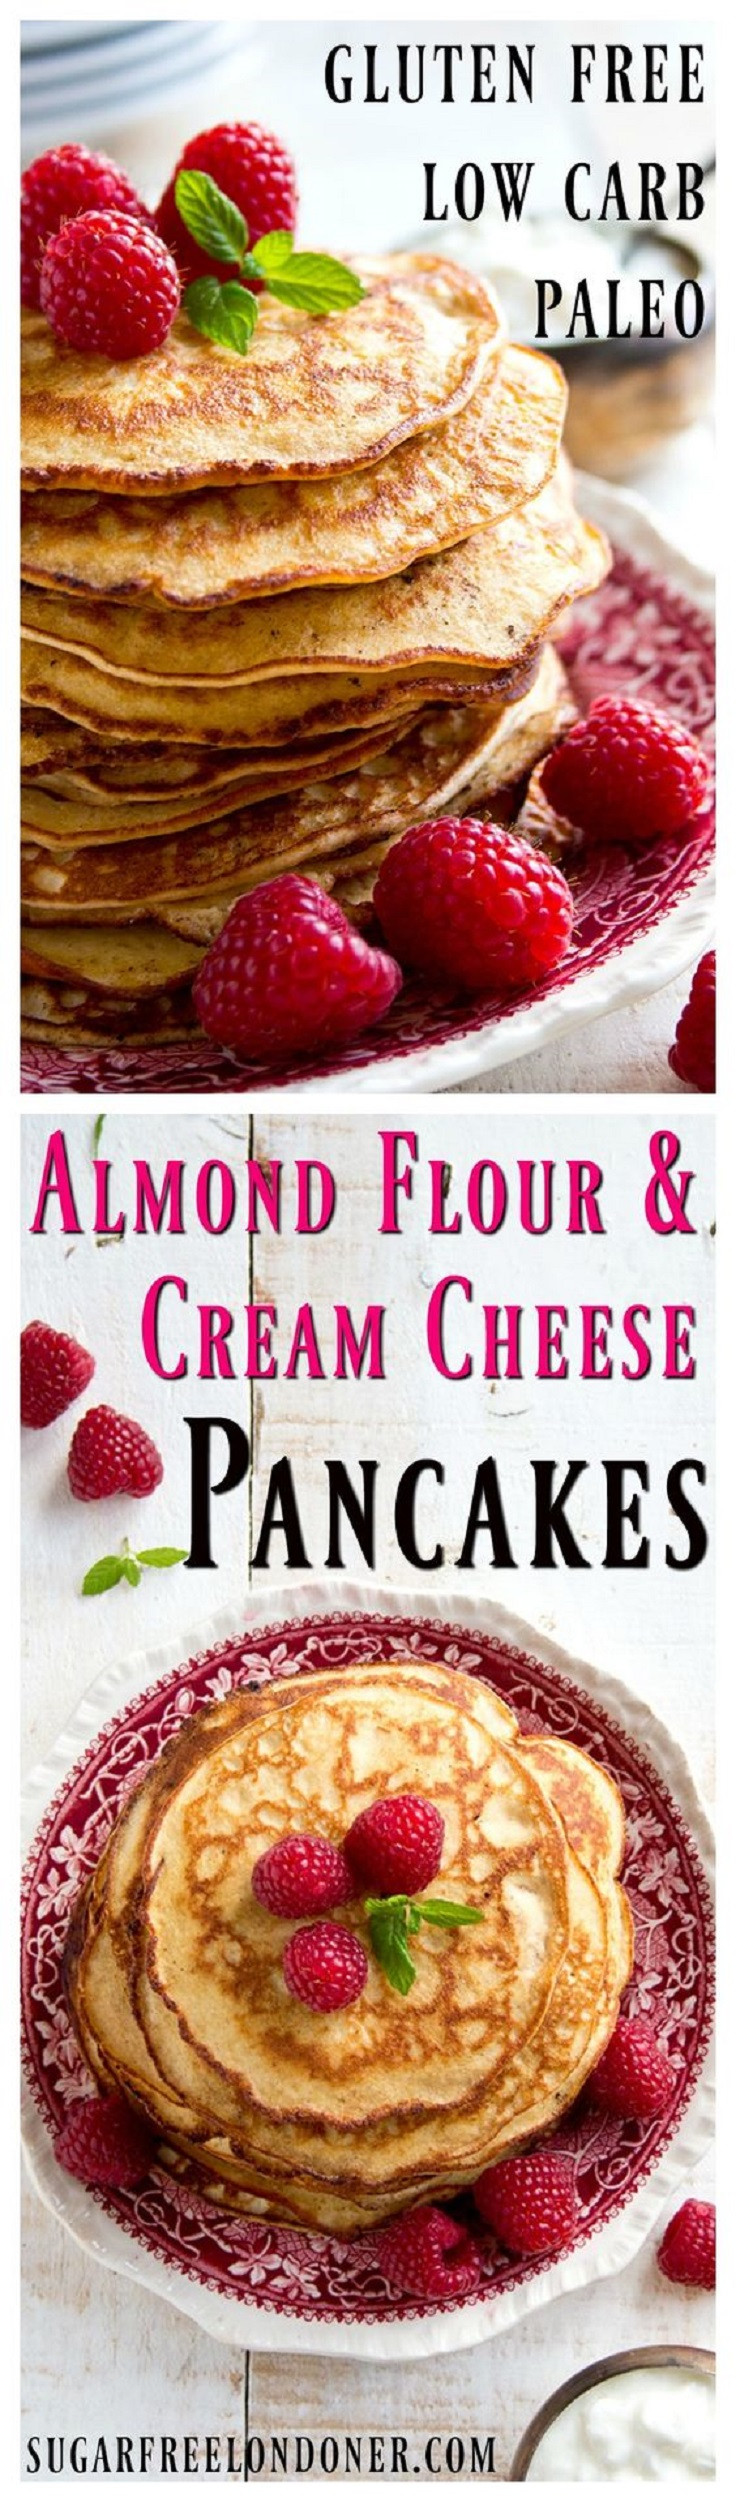 Cream Cheese Pancakes With Almond Flour
 13 Easy Low Carb Recipes Healthy Breakfast Lunch